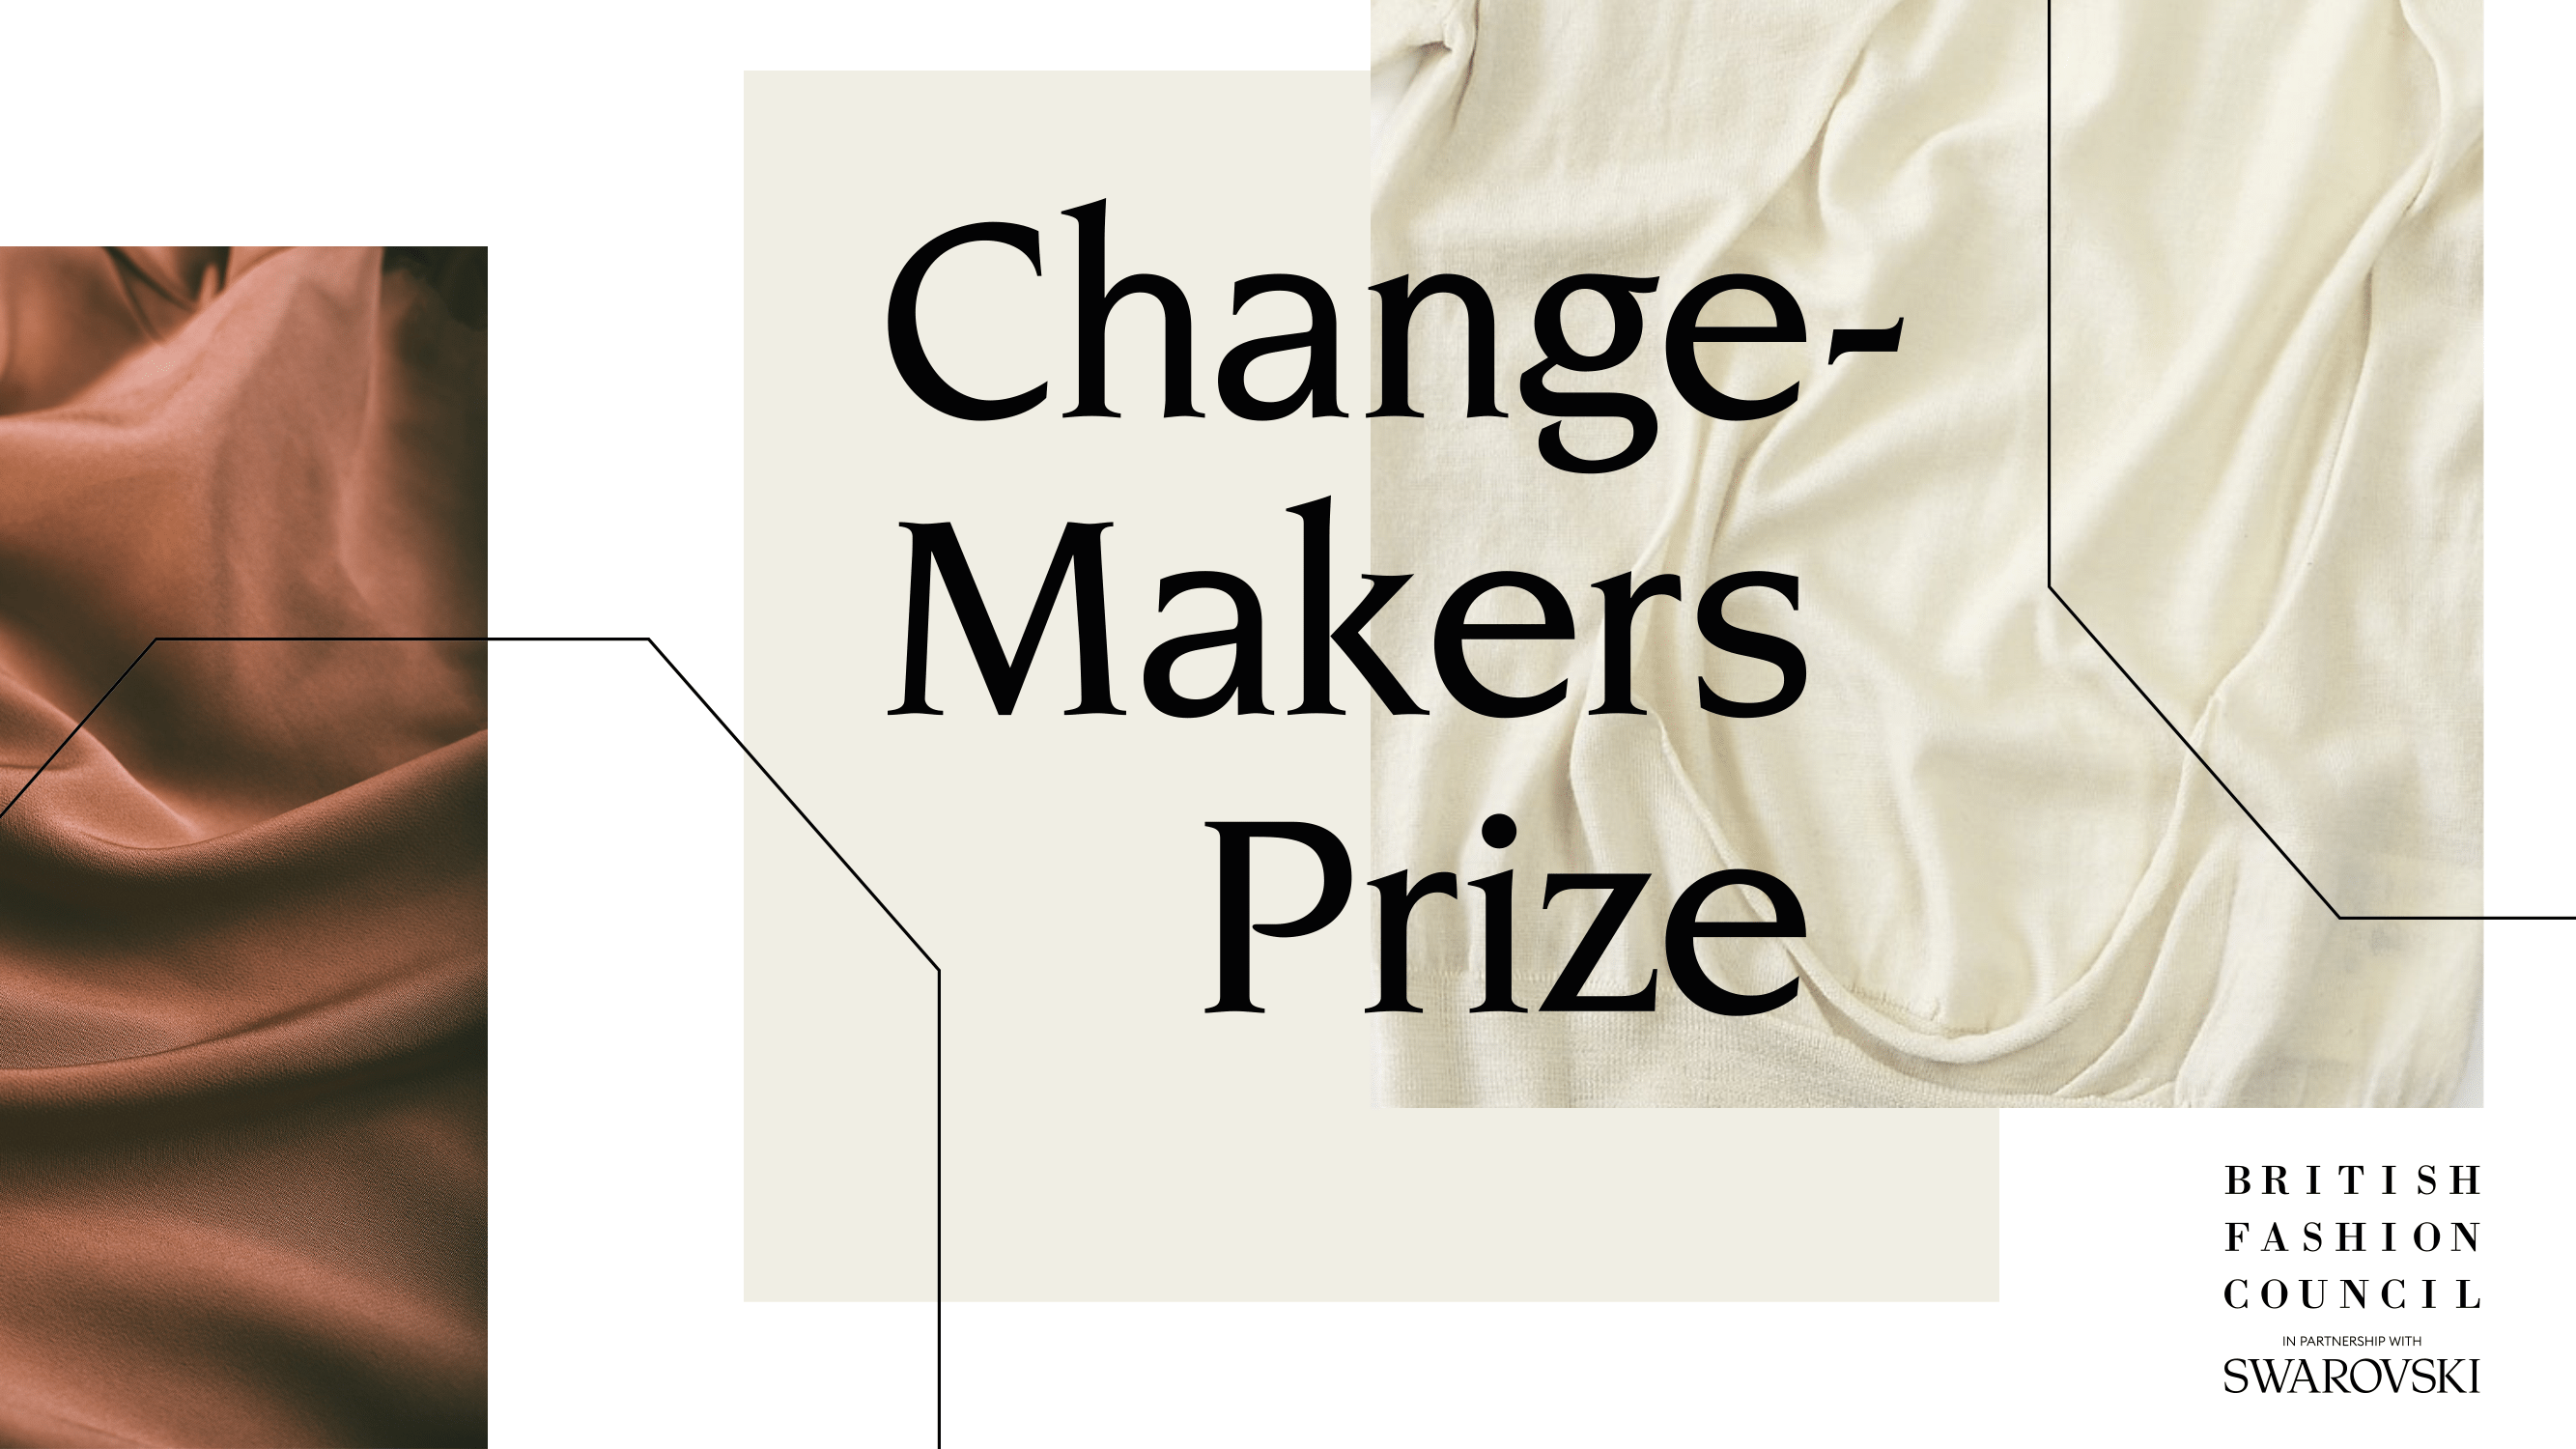 British Fashion Council announces launch of BFC Changemakers Prize in Partnership with Swarovski